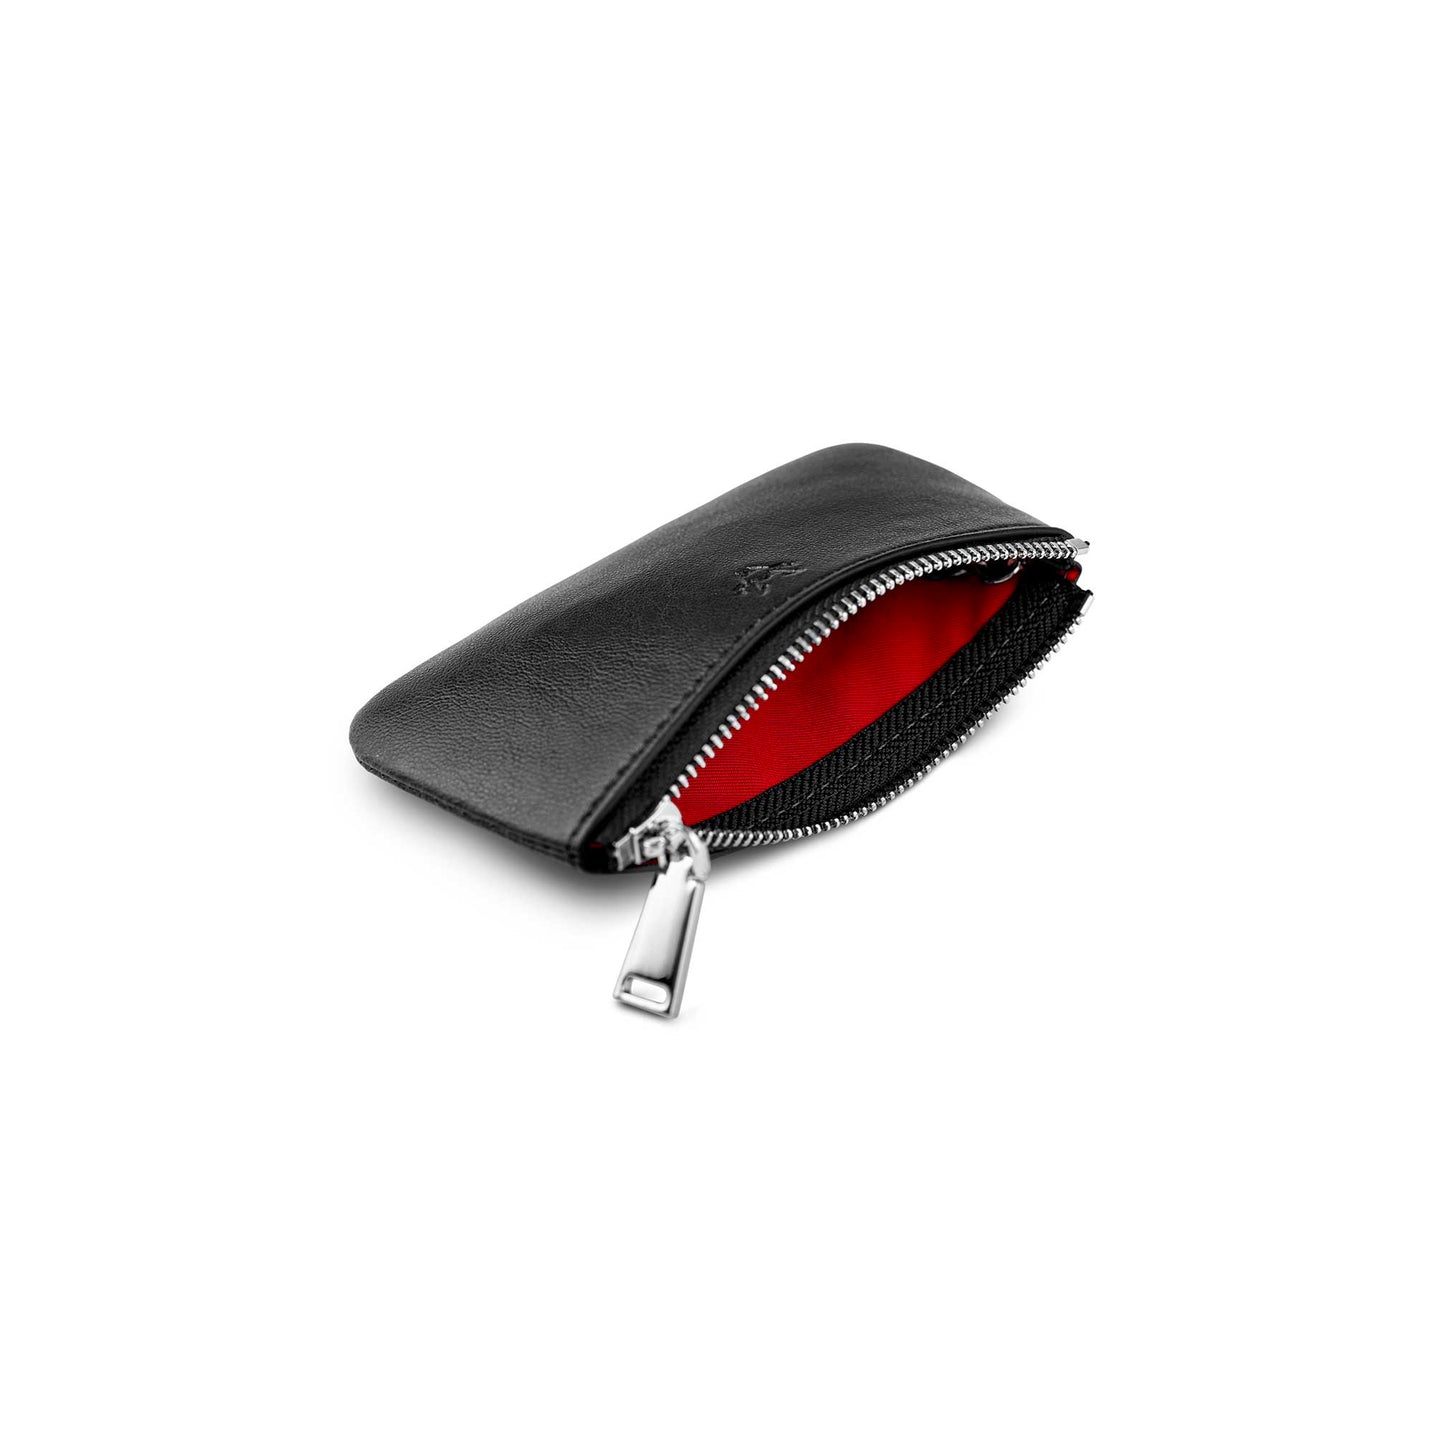 Zipped Coin Purse in Vegan Leather with Key Chain